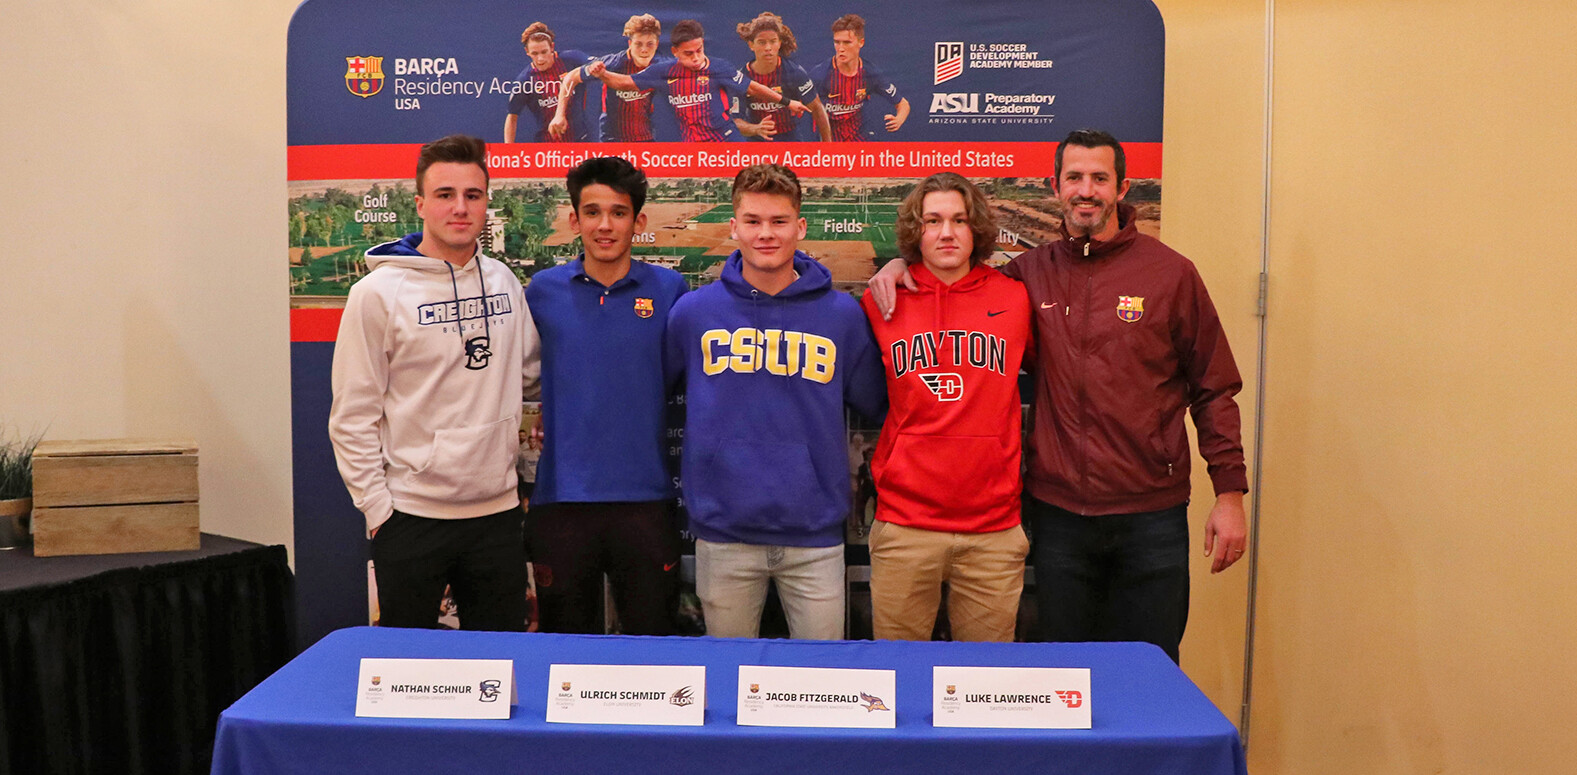 Nathan Schnur, Ulrich Schmidt, Jacob Fitzgerald, Luke Lawrence, and head coach Ged Quinn posing for a picture at the signing day banquet